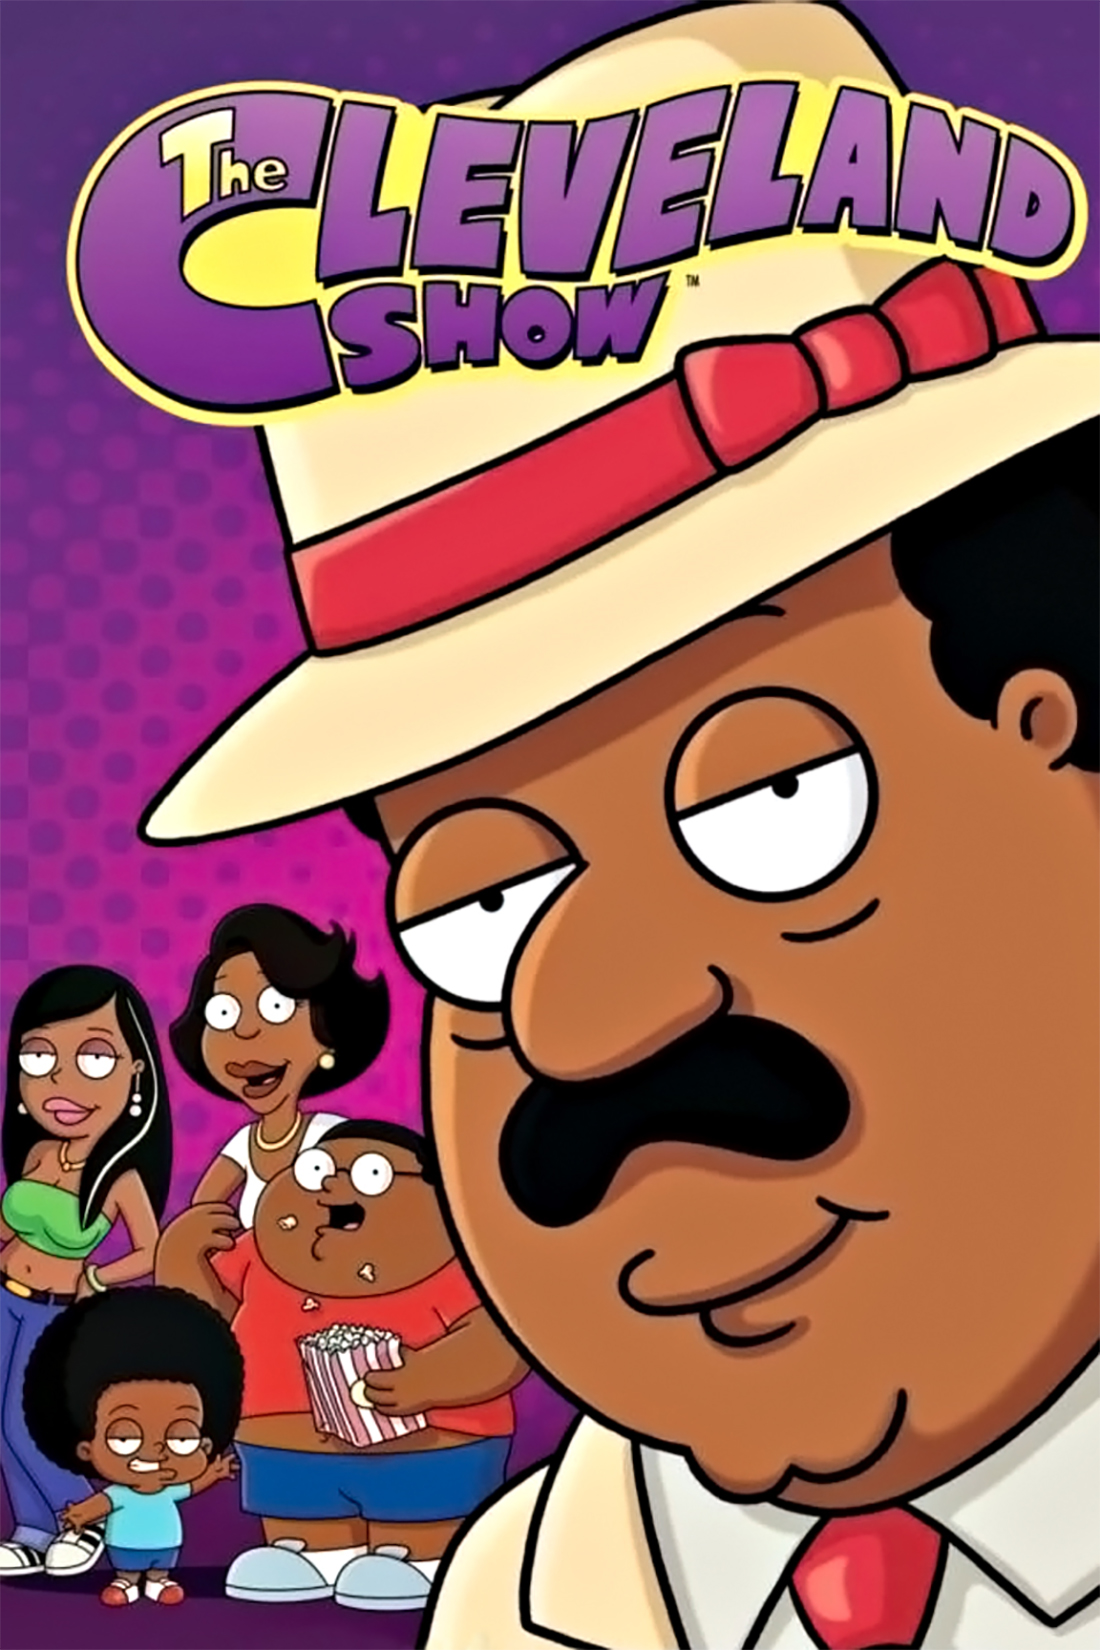 cecelia weeks recommends the cleveland show parody pic